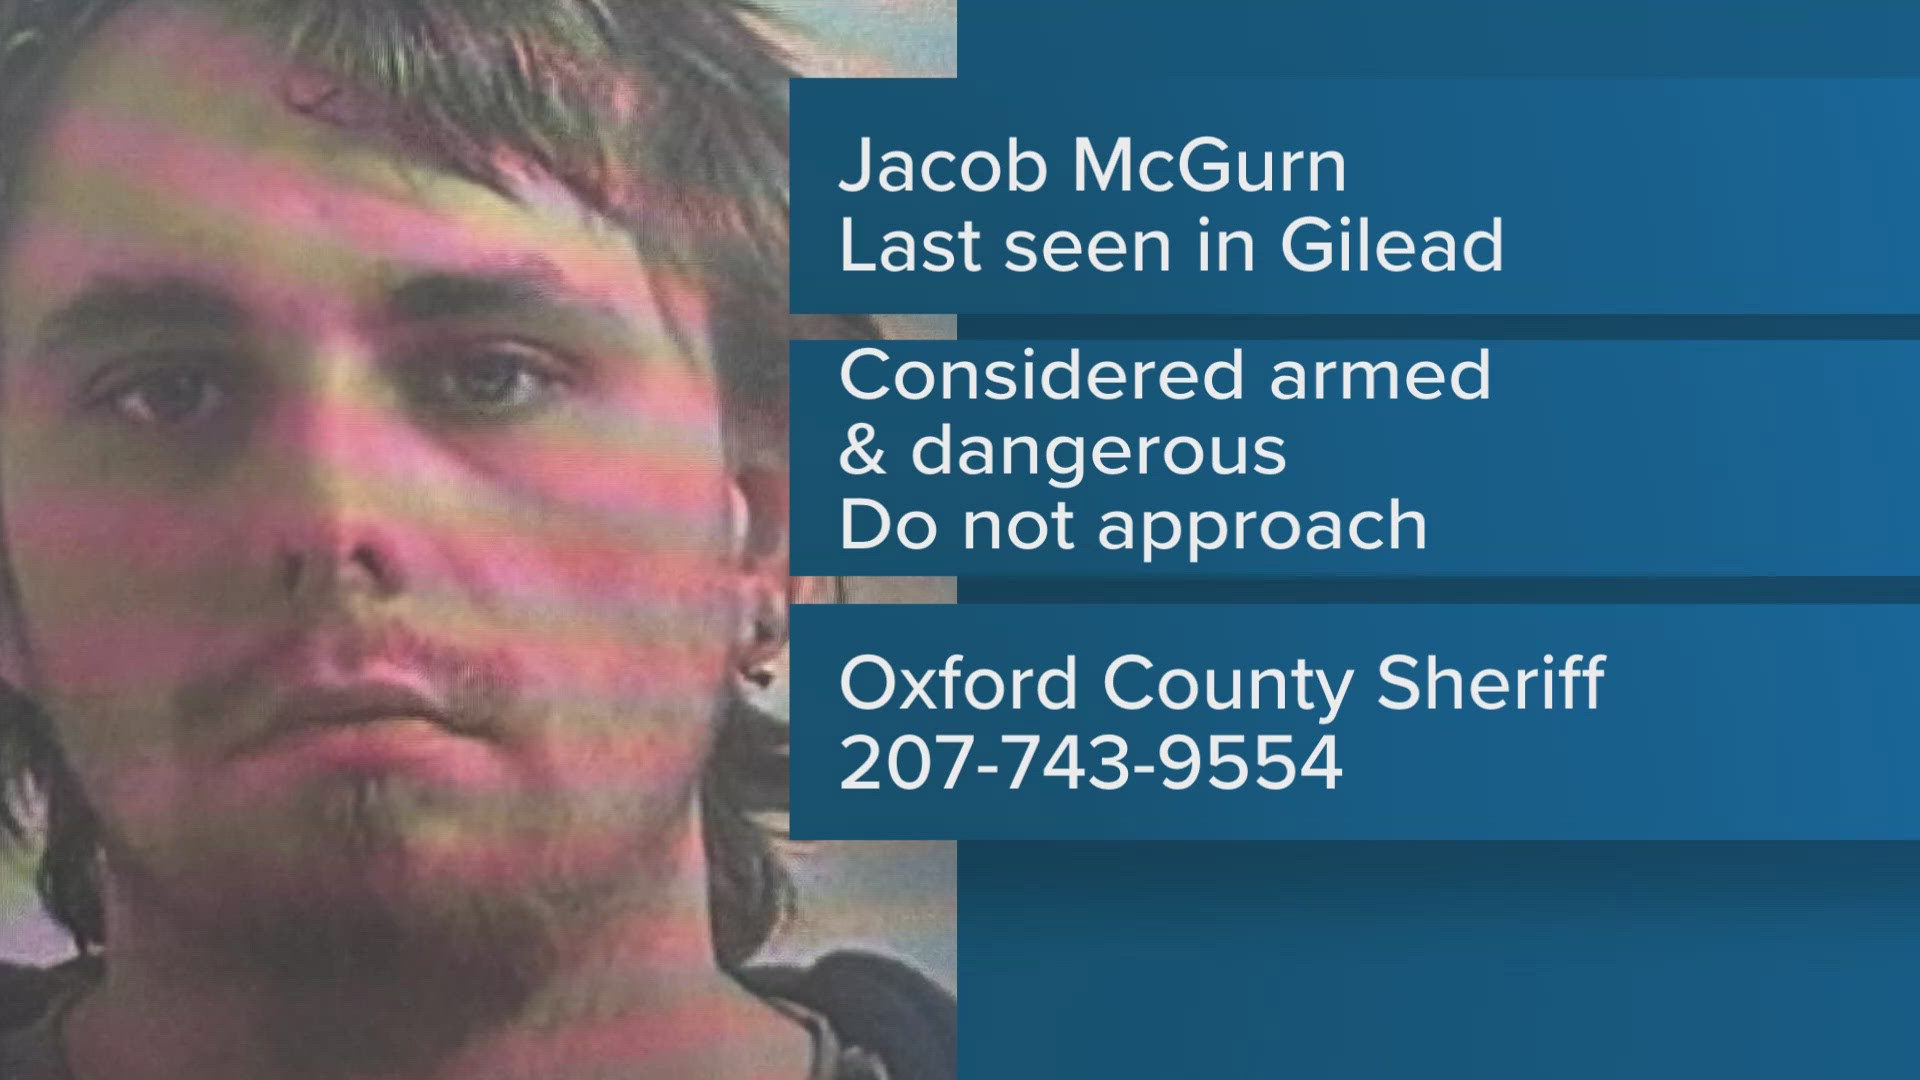 The Oxford County Sheriff's Office is seeking help locating a man wanted on numerous charges who was last seen on foot along Route 2 in the town of Gilead.